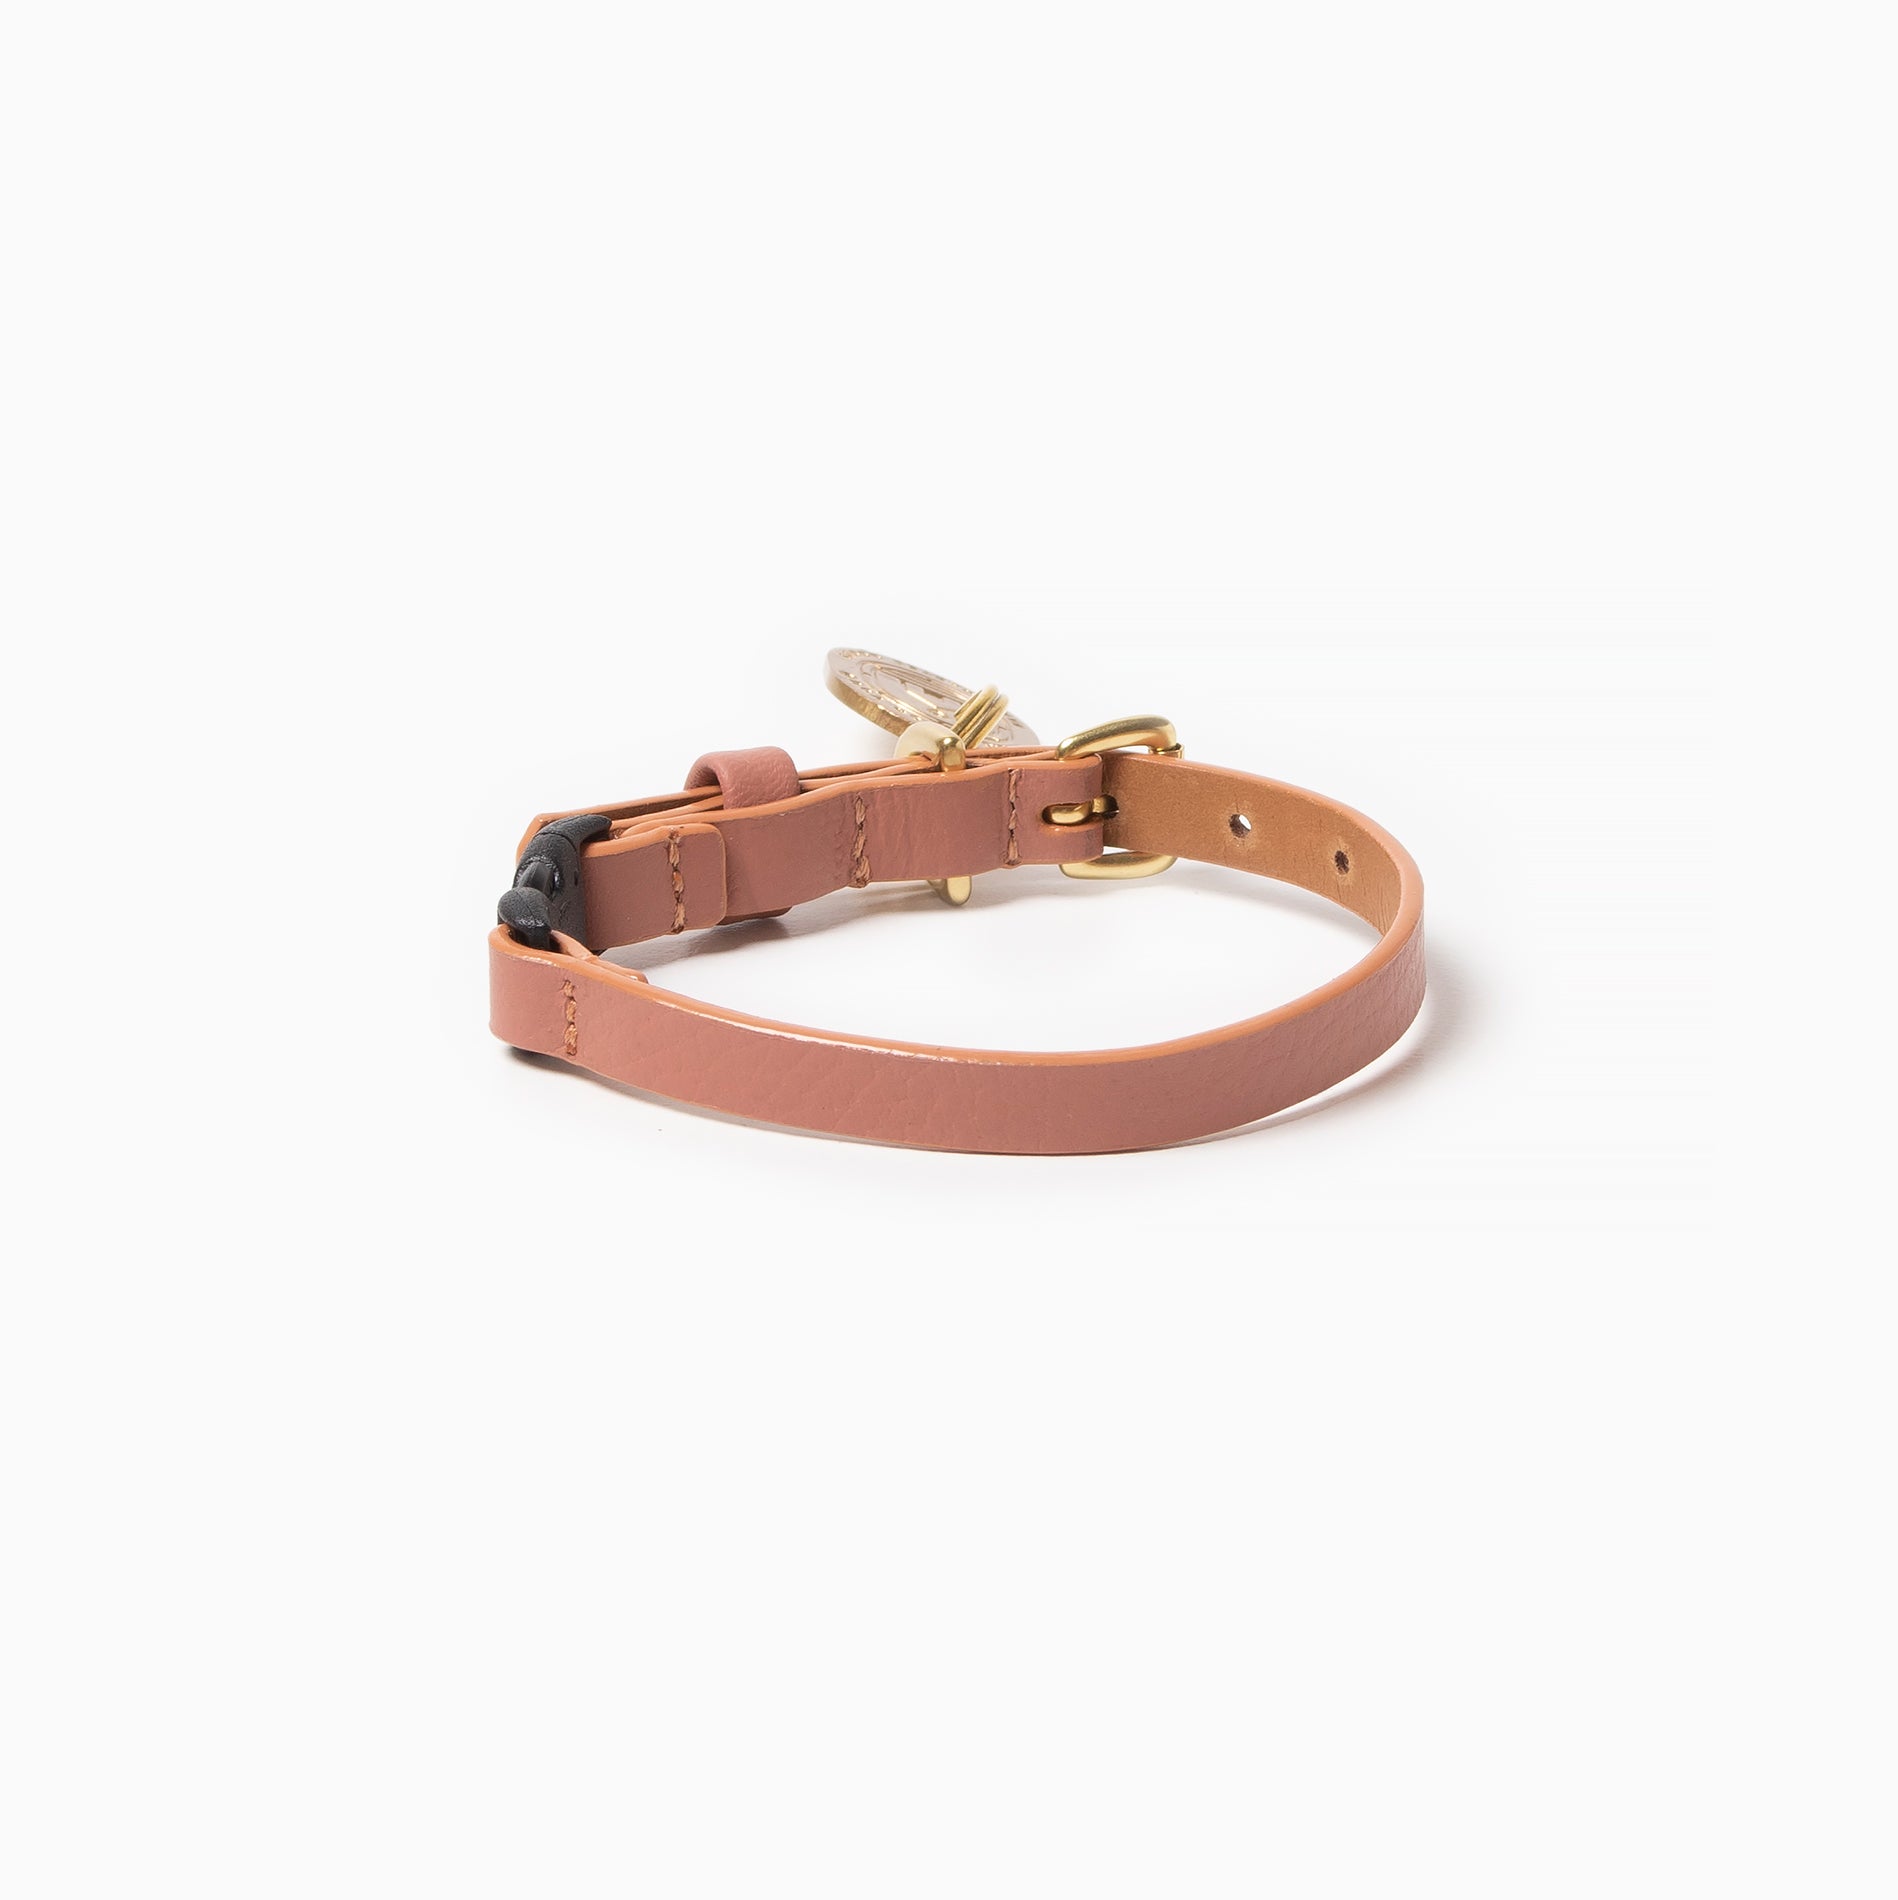 Nude Pink leather cat collar with tag ID and security clip. Handcrafted leather kitty collar.